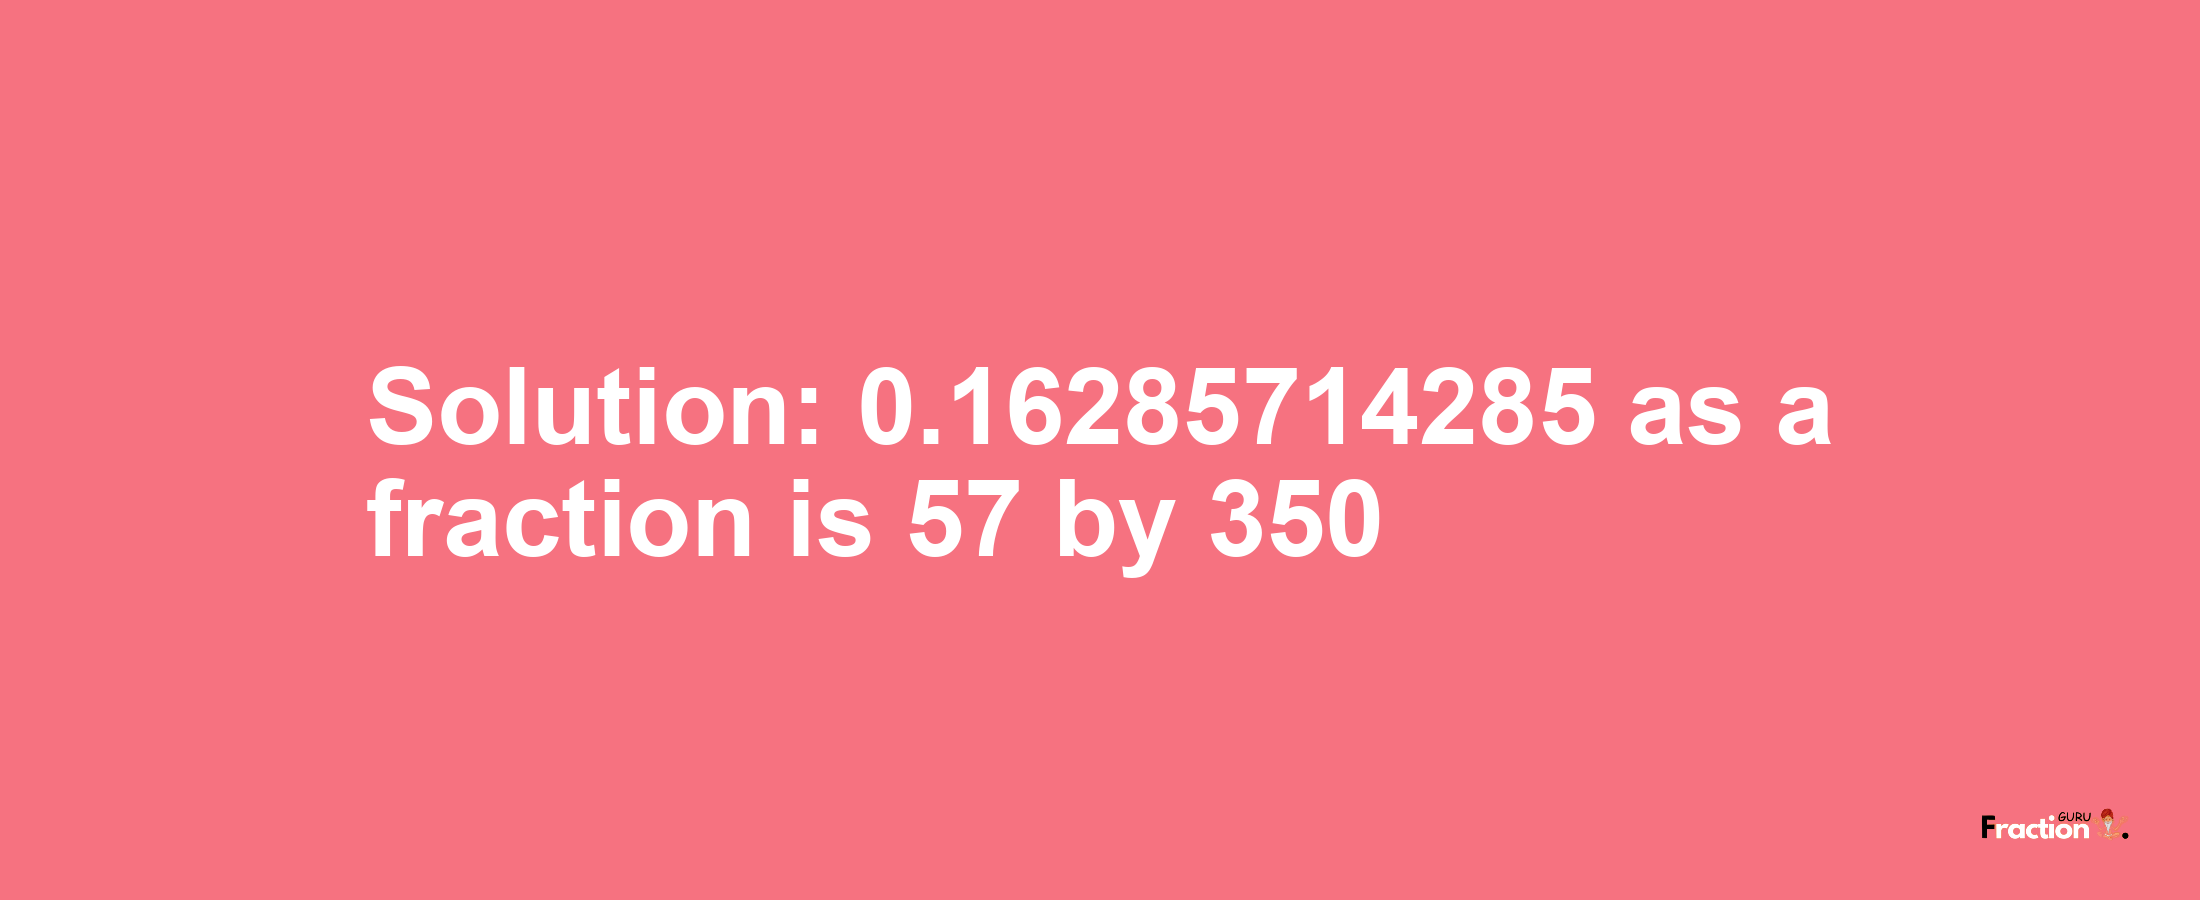 Solution:0.16285714285 as a fraction is 57/350